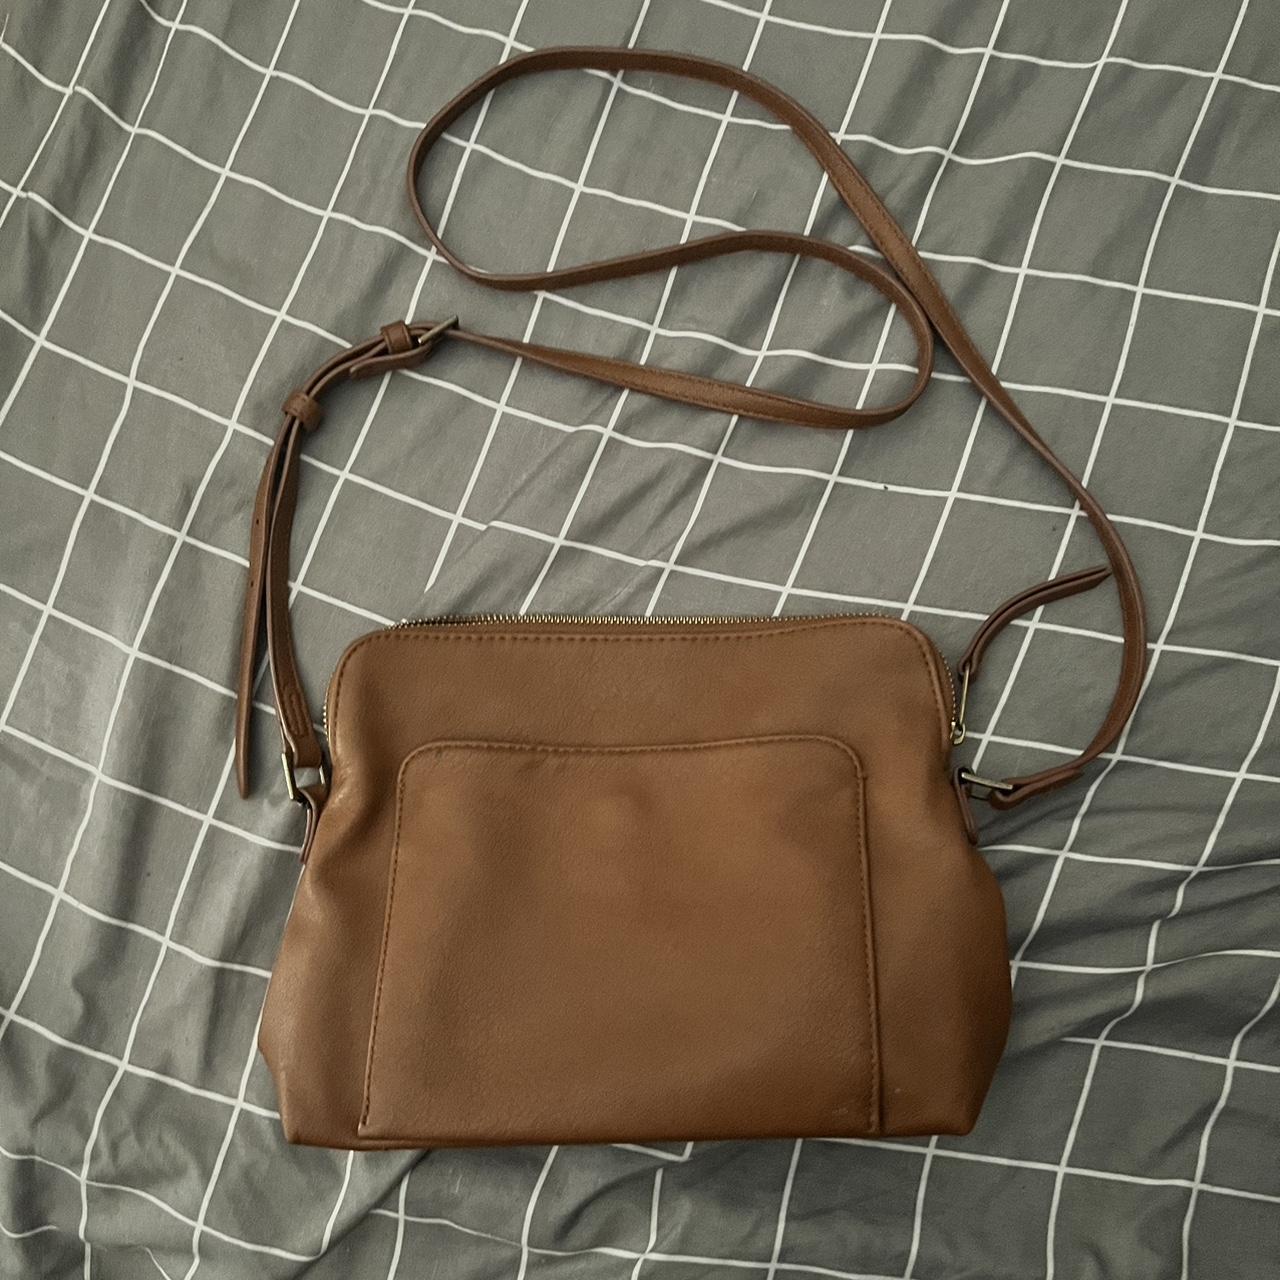 Target Neutral Bags under $35 curated on Ltk | Bags, Gucci crossbody bag, Crossbody  bag